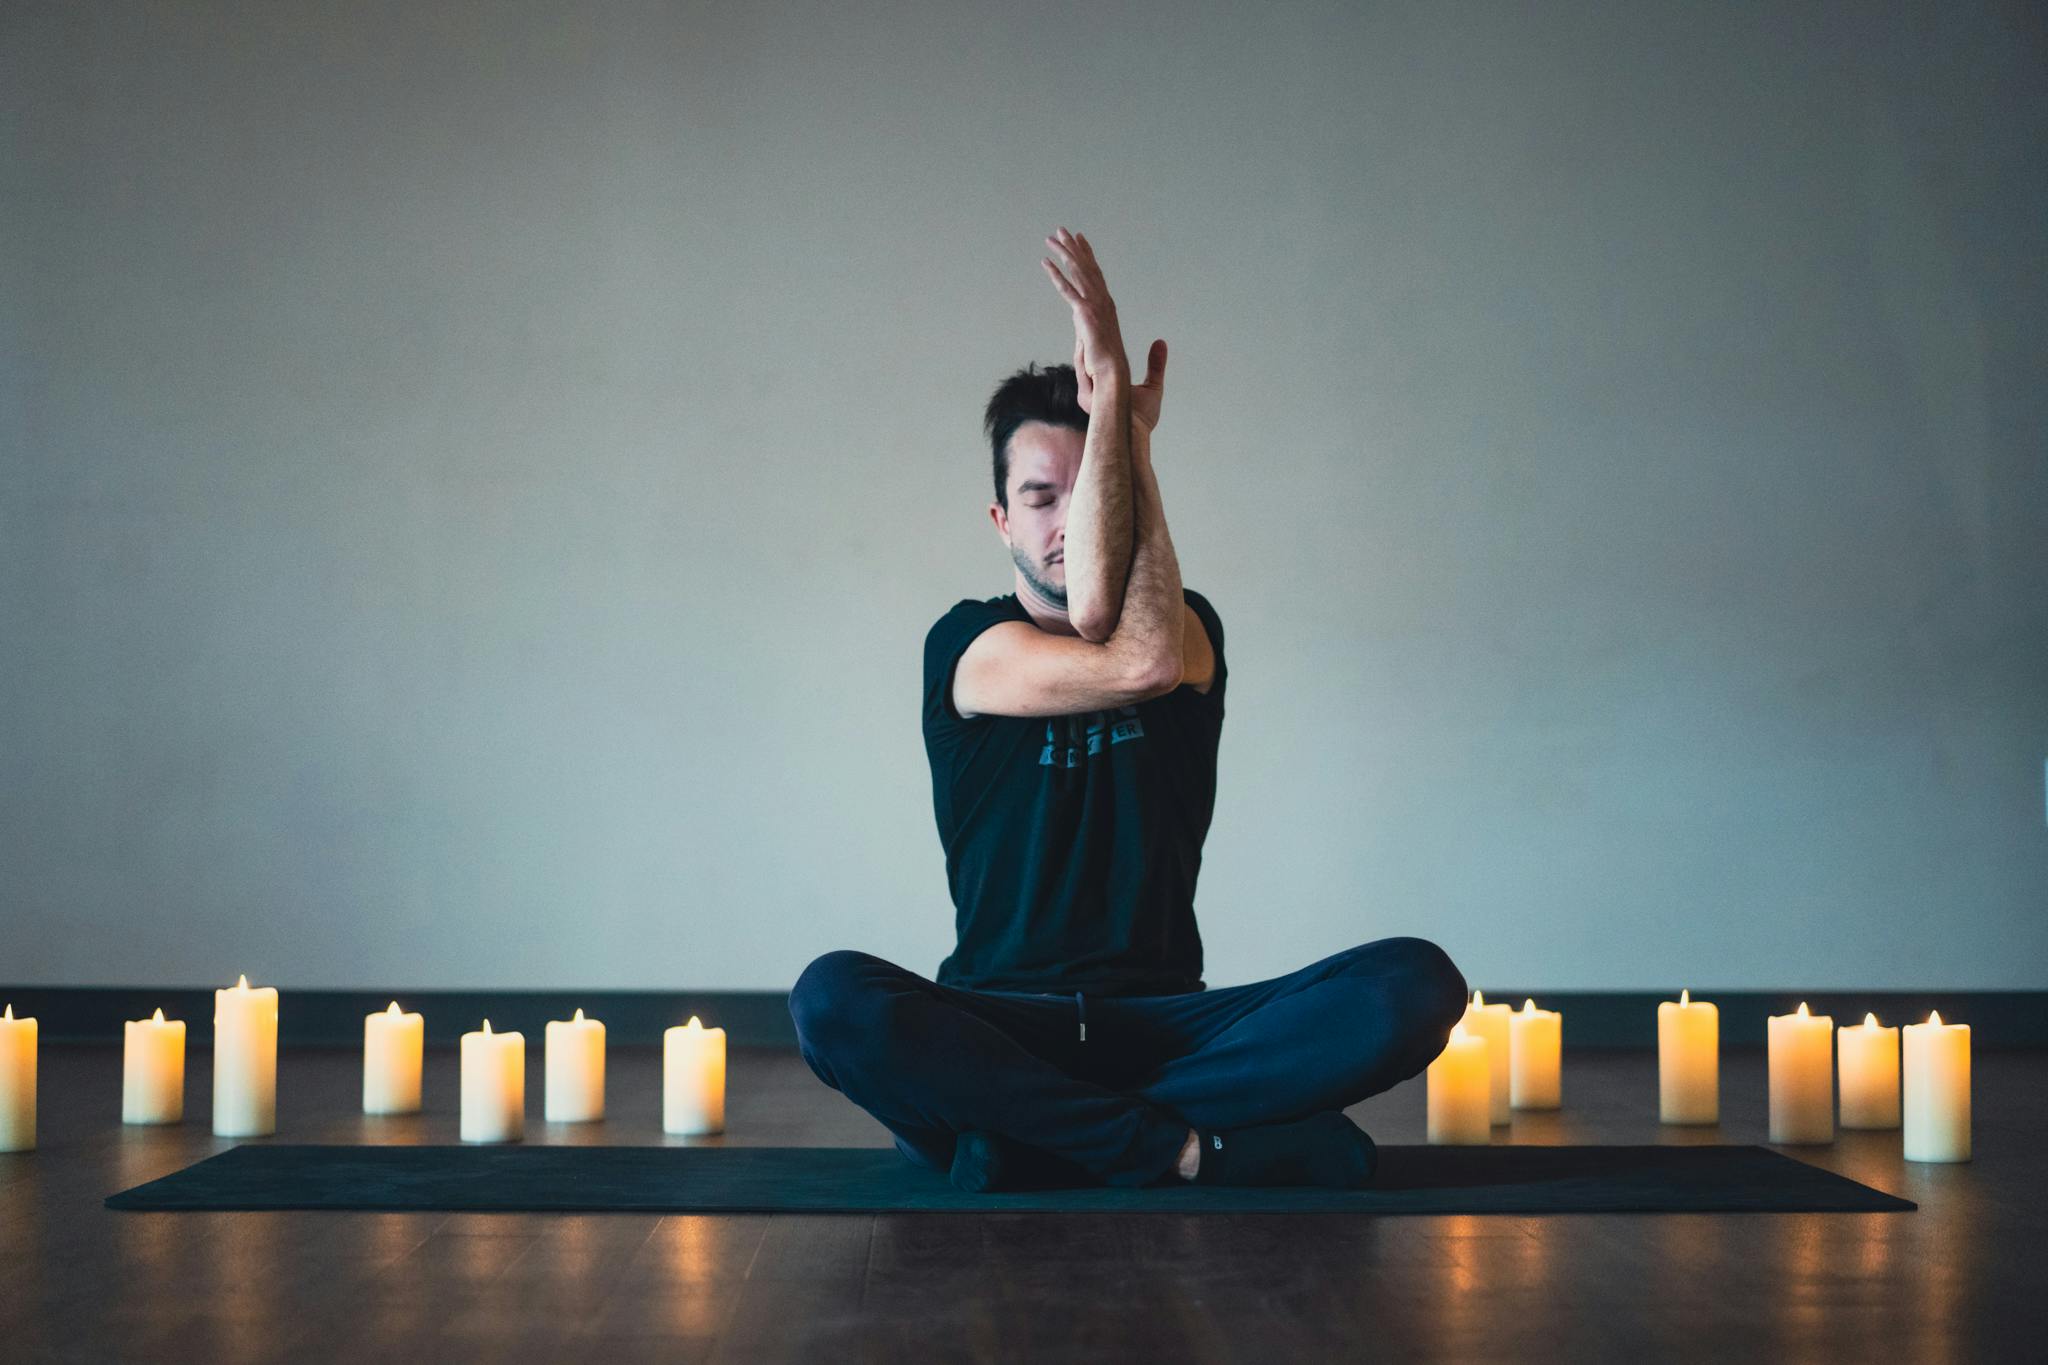 A guy doing yoga surrounded by candles.